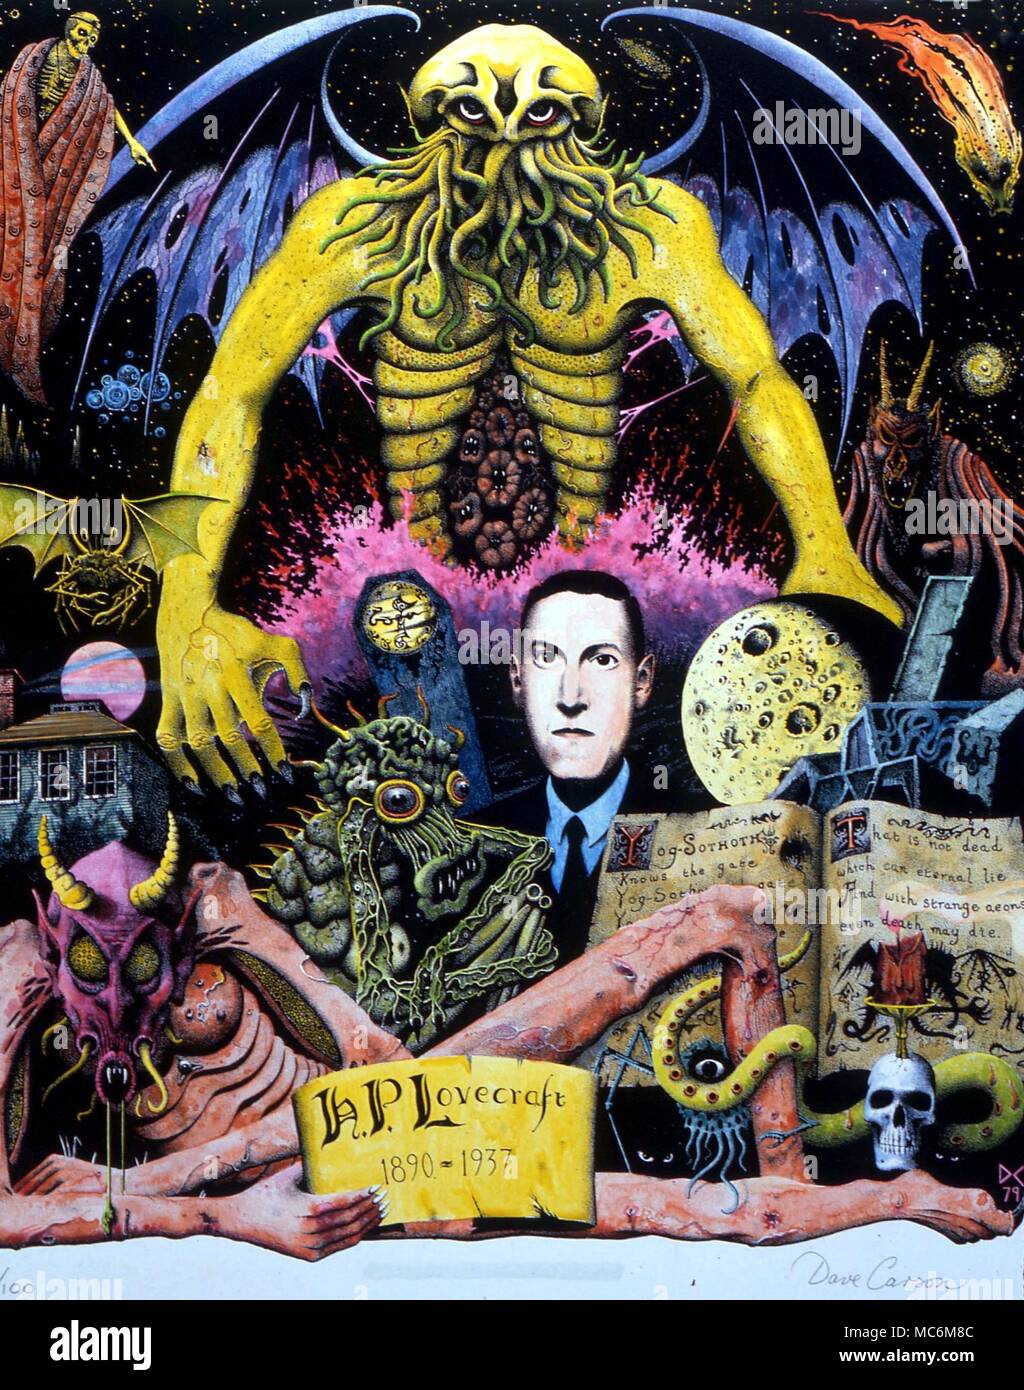 MONSTERS - LOVECRAFT'S MONSTERS. Portrait of the occultist, poet and novelist of supernatural tales, Howard Phillips Lovercraft (1890-1937). here he is depicted among monsters of his own creation. Picture by David Carson. Reproduction rights with CW Stock Photo